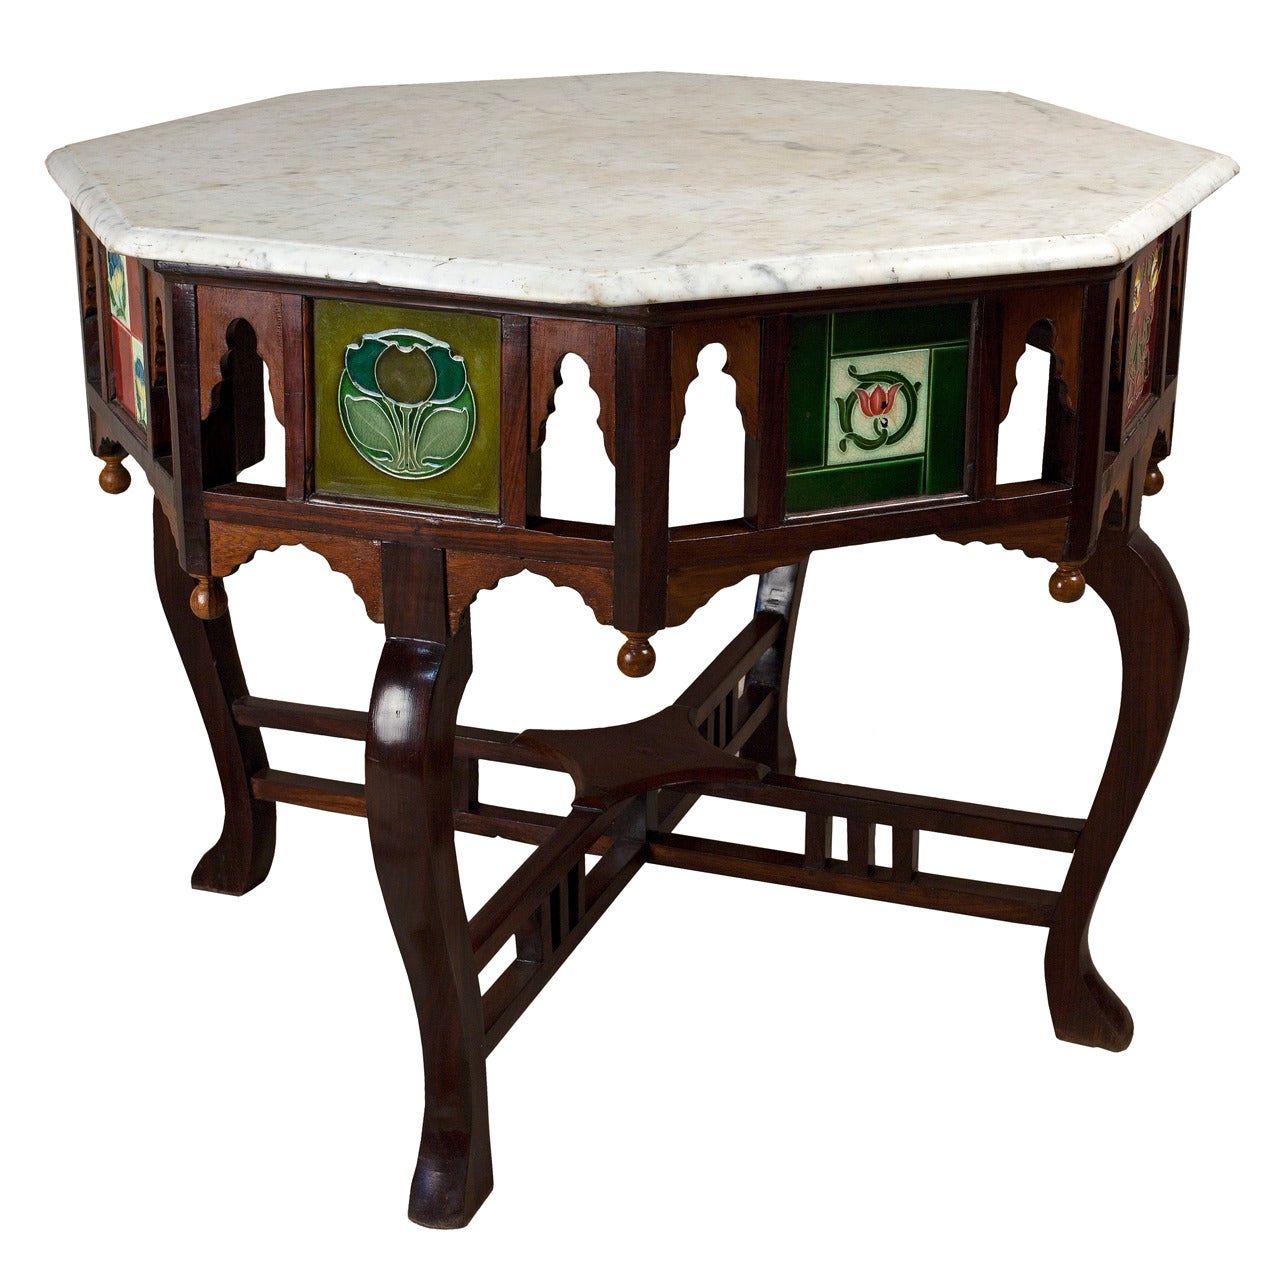 Arts and Crafts Rosewood and Teak Center Table with English Tiles and Marble Top